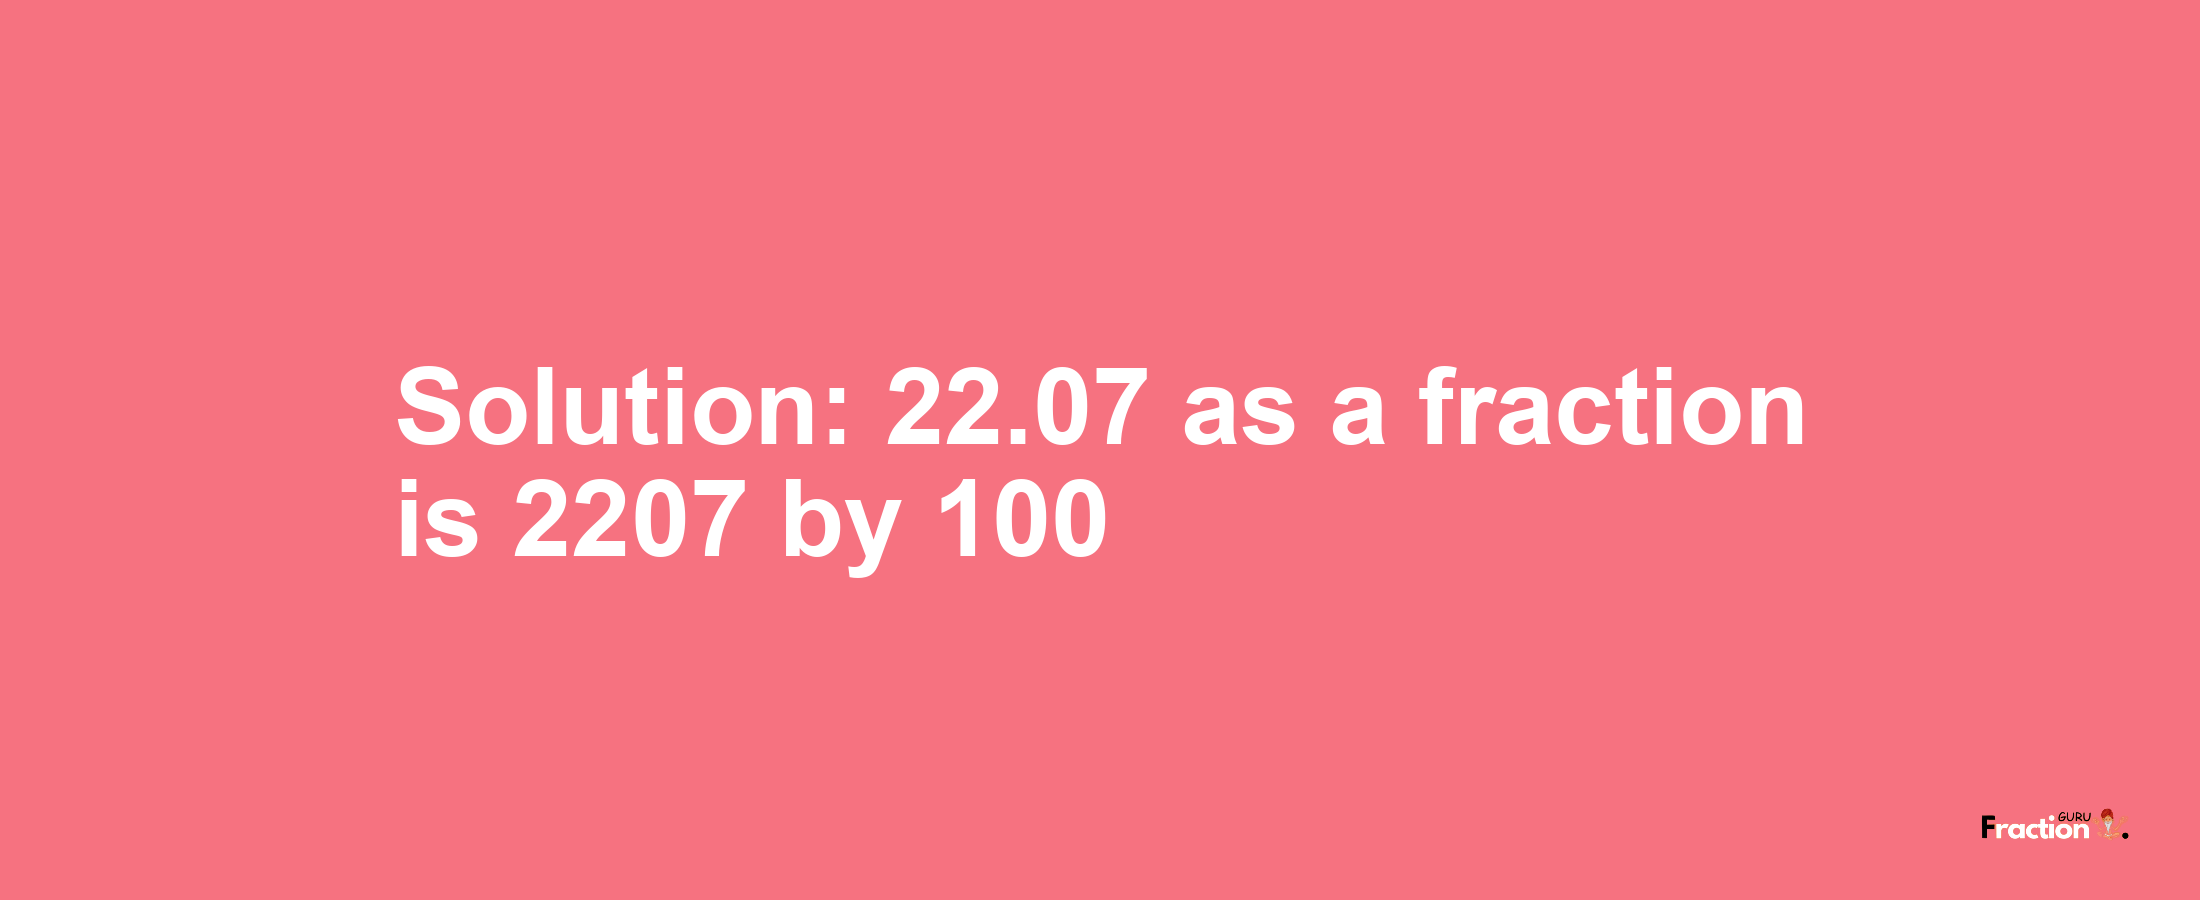 Solution:22.07 as a fraction is 2207/100